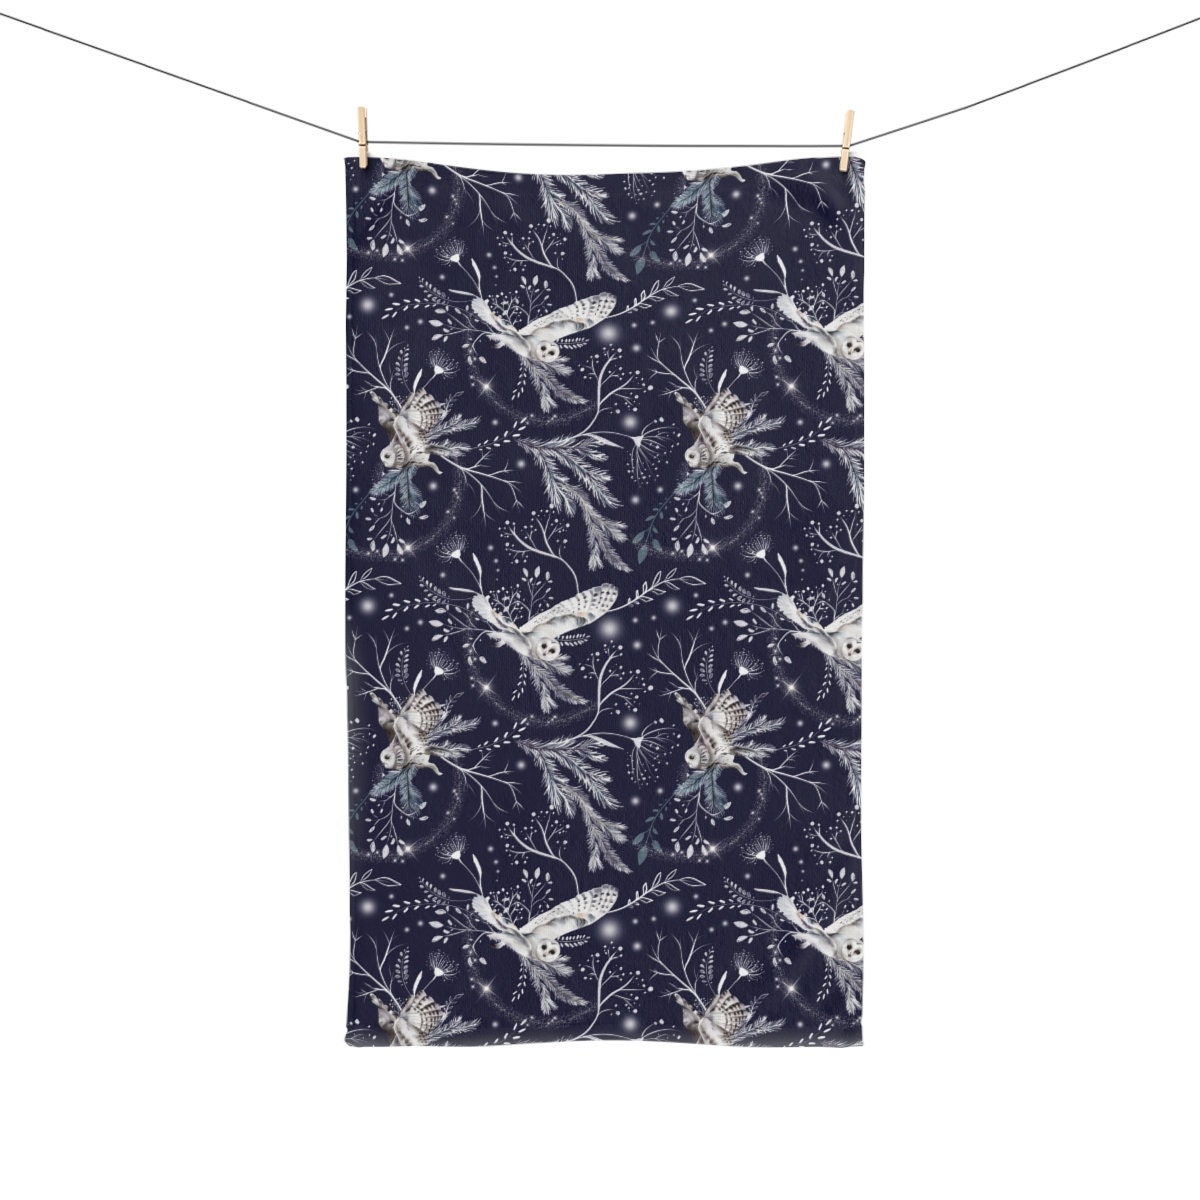 White Owl Christmas Hand Towel | Winter Owl Towel | Midnight Blue Magical Style Hand Towel